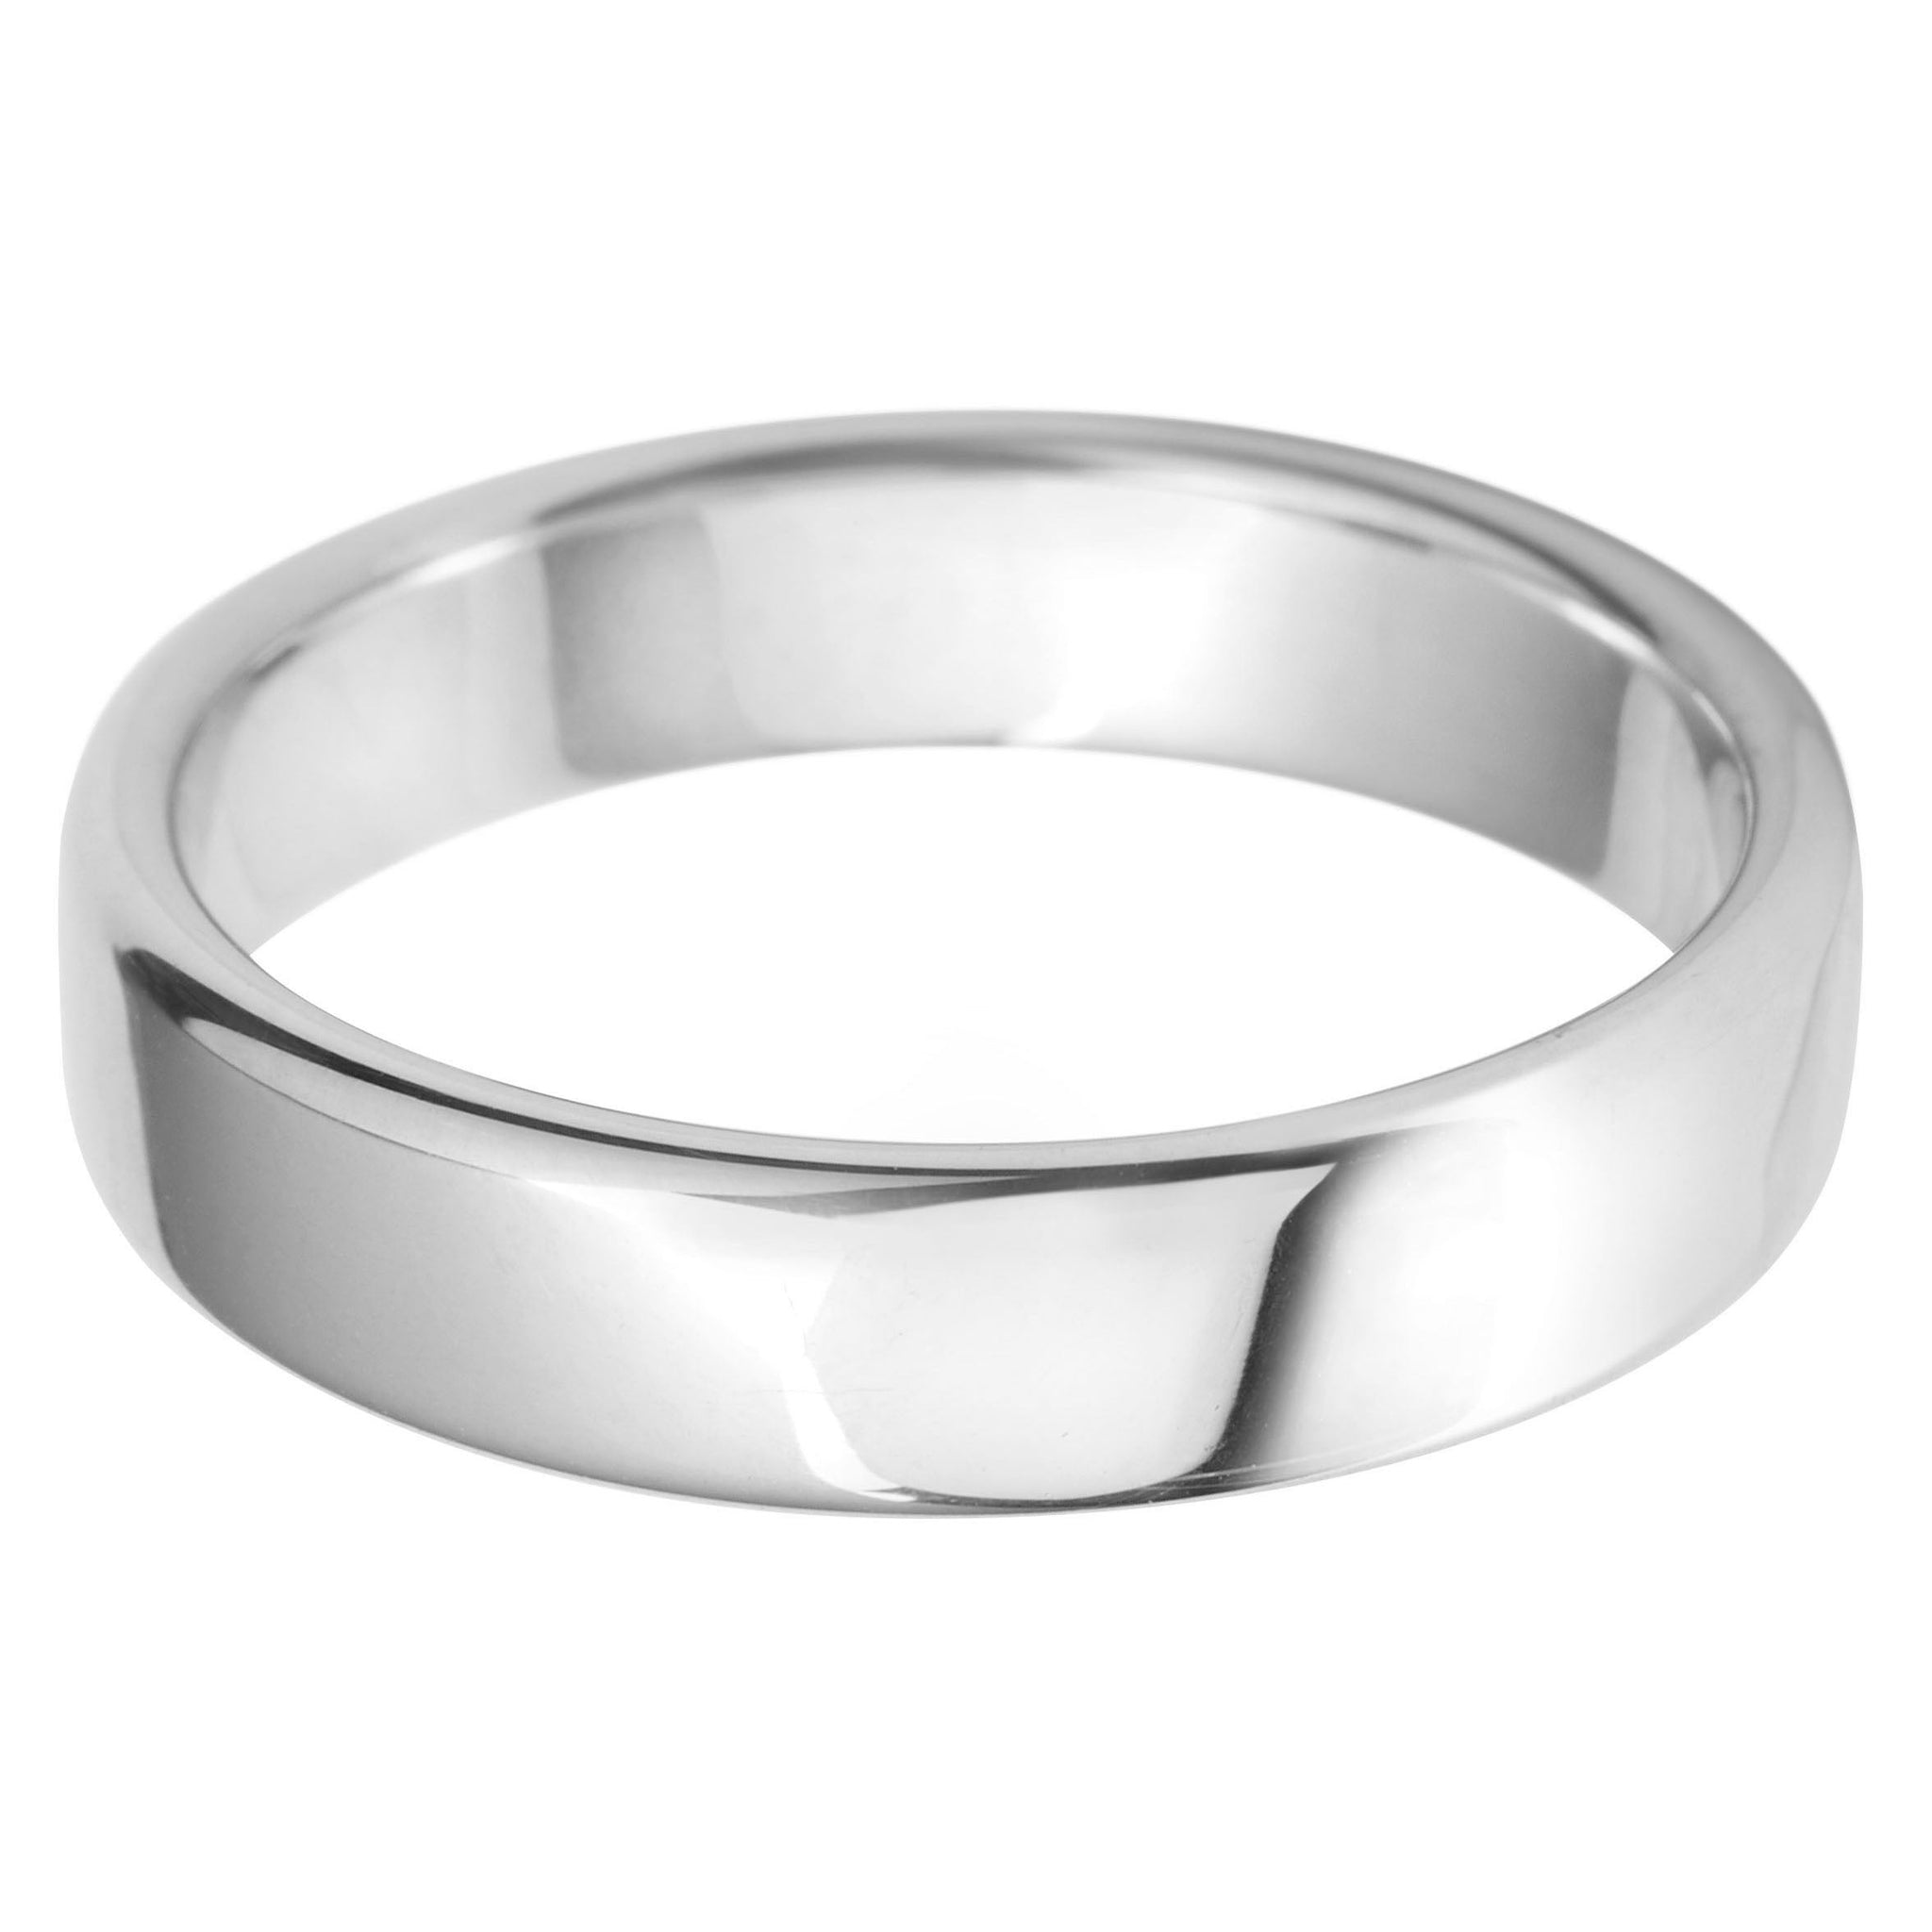 5mm Rounded Flat lightweight Wedding Ring